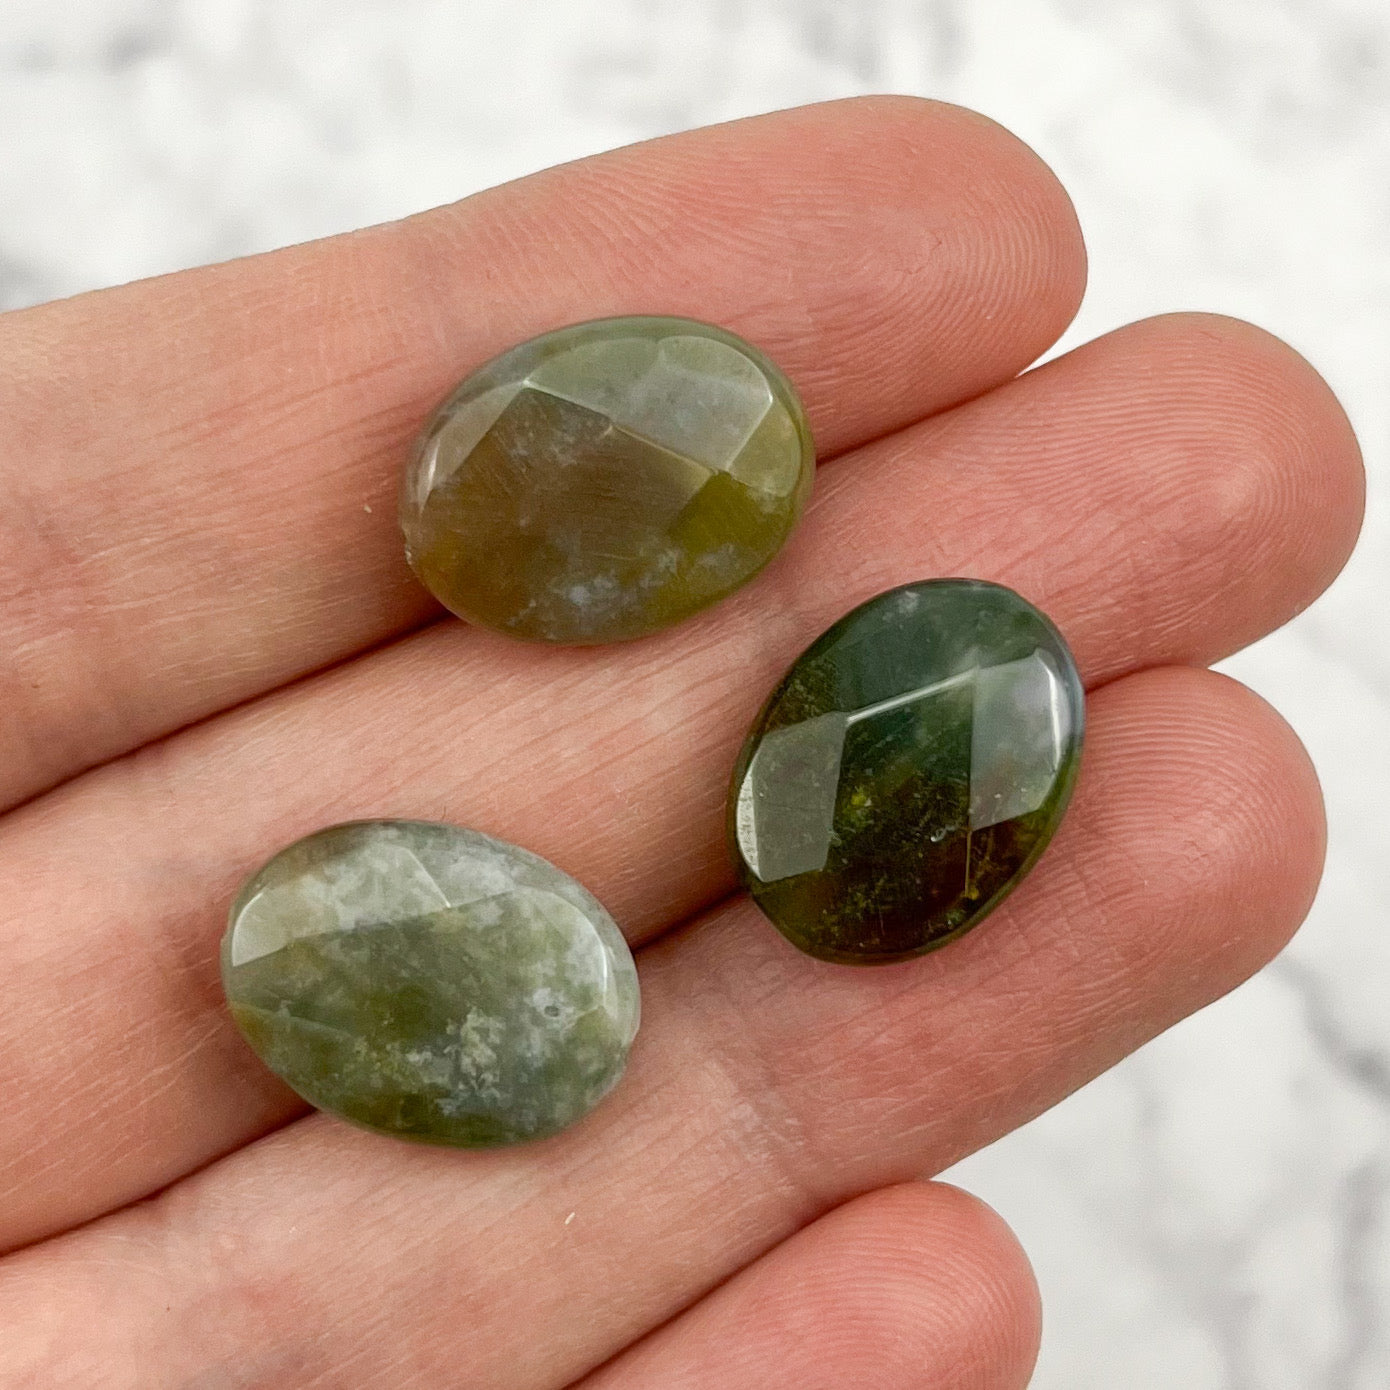 17mm x 13mm Indian Agate Faceted Green Oval Focal Bead Pack (3 Beads)